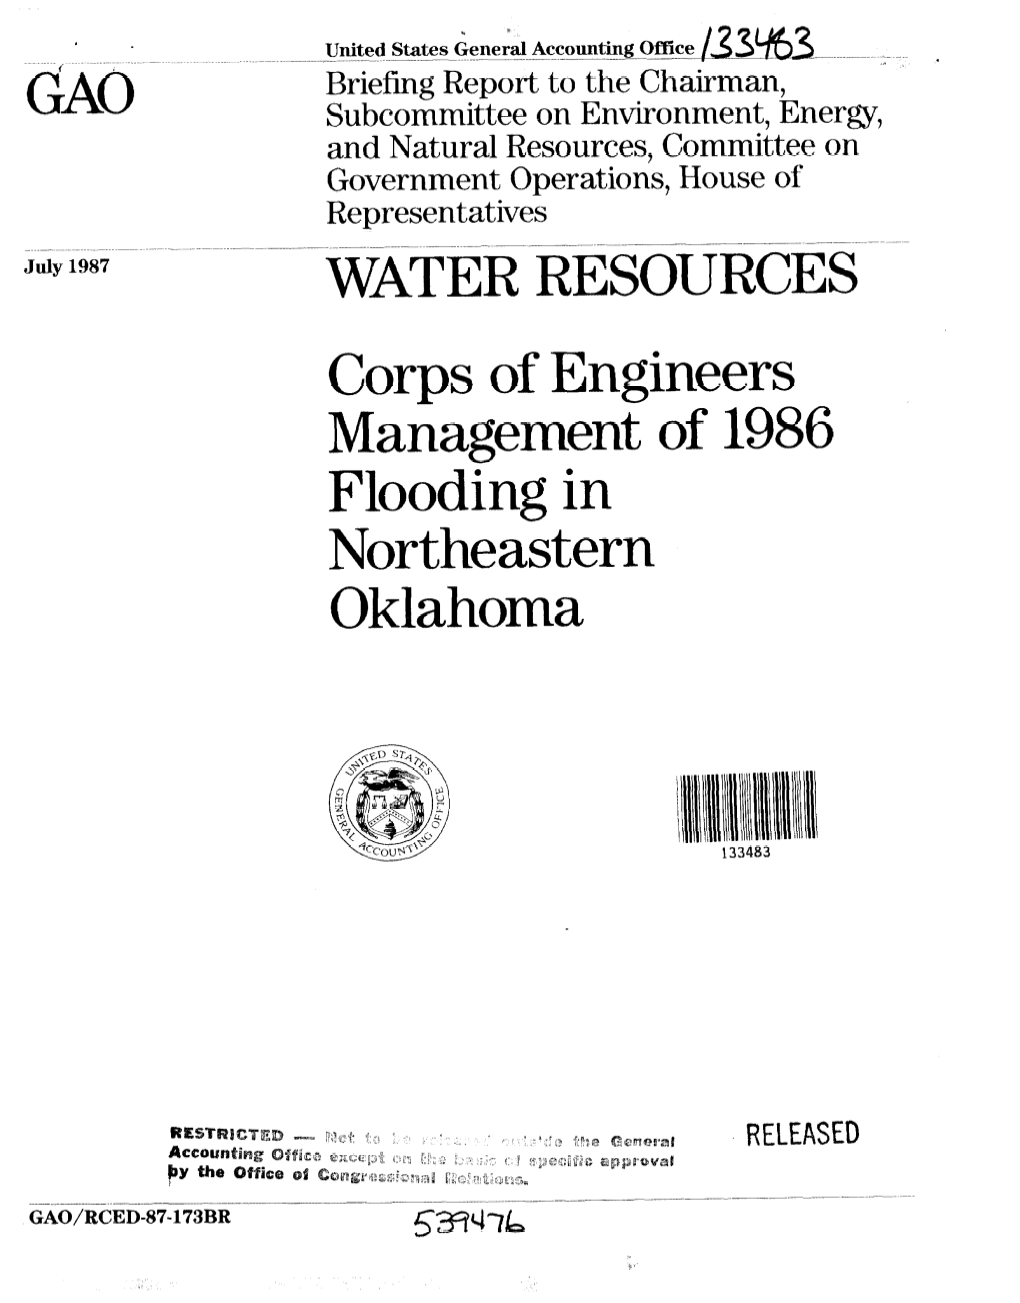 Corps of Engineers Management of 1986 Flooding in Northeastern Oklahoma